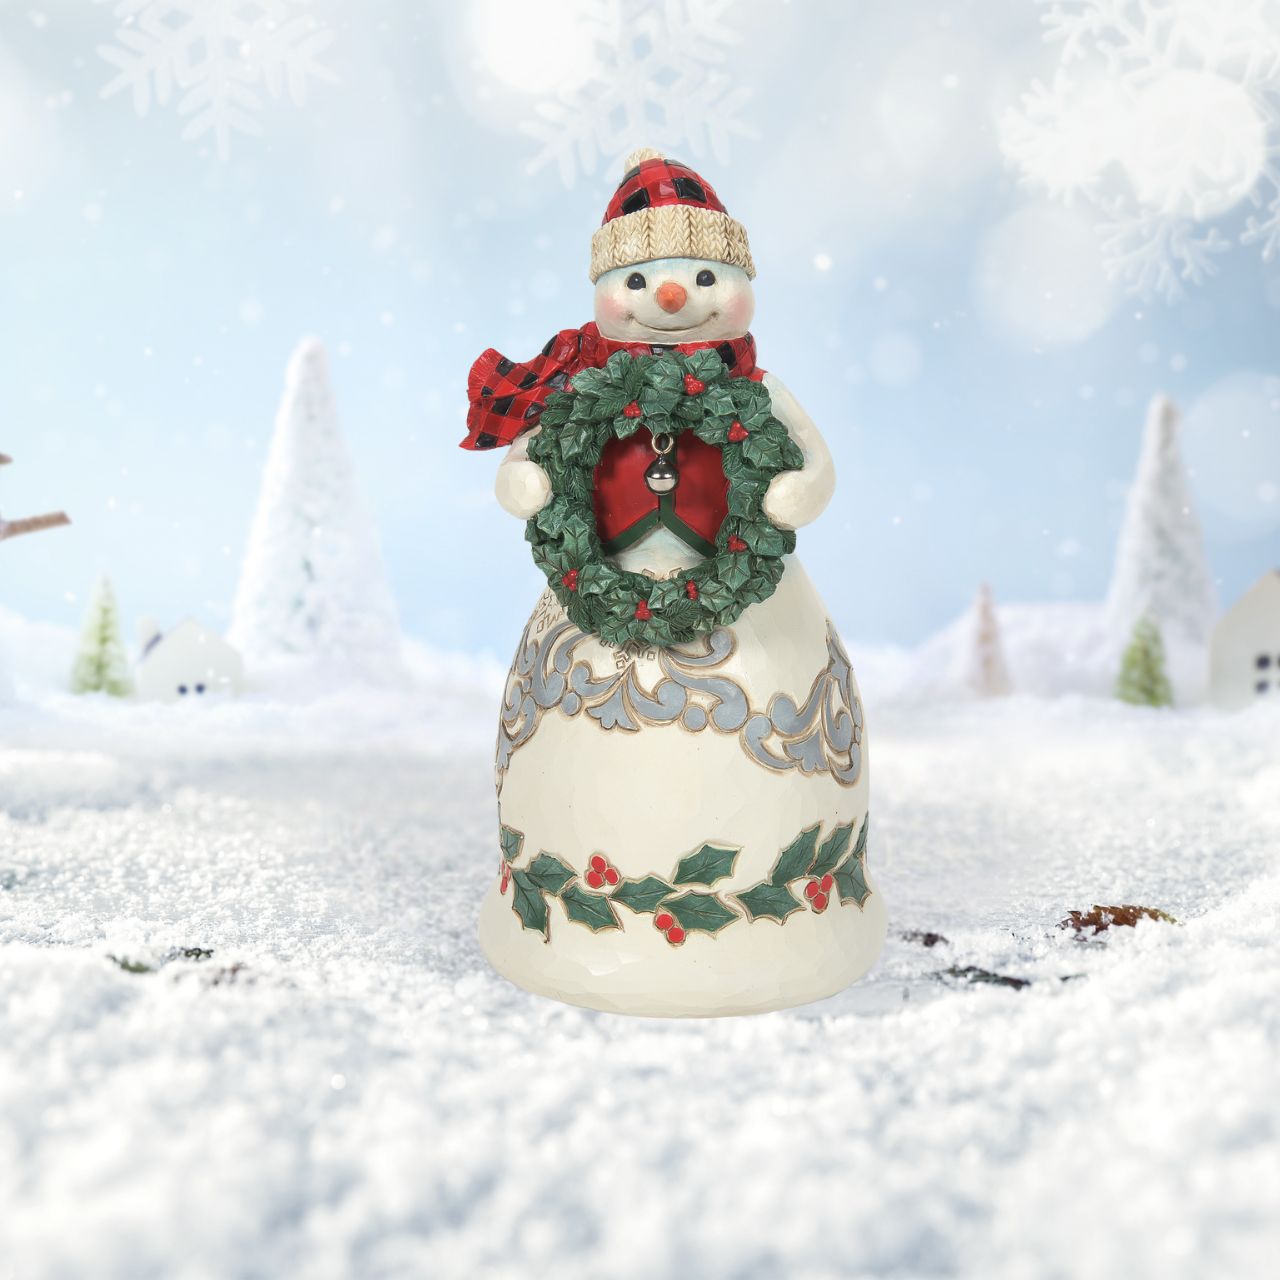 Heartwood Creek Highland Glen Mr Snowman Figurine  Designed by award winning artist Jim Shore as part of the Heartwood Creek Highland Glen Collection, hand crafted using high quality cast stone and hand painted, this festive Snowman is perfect for the Christmas season.